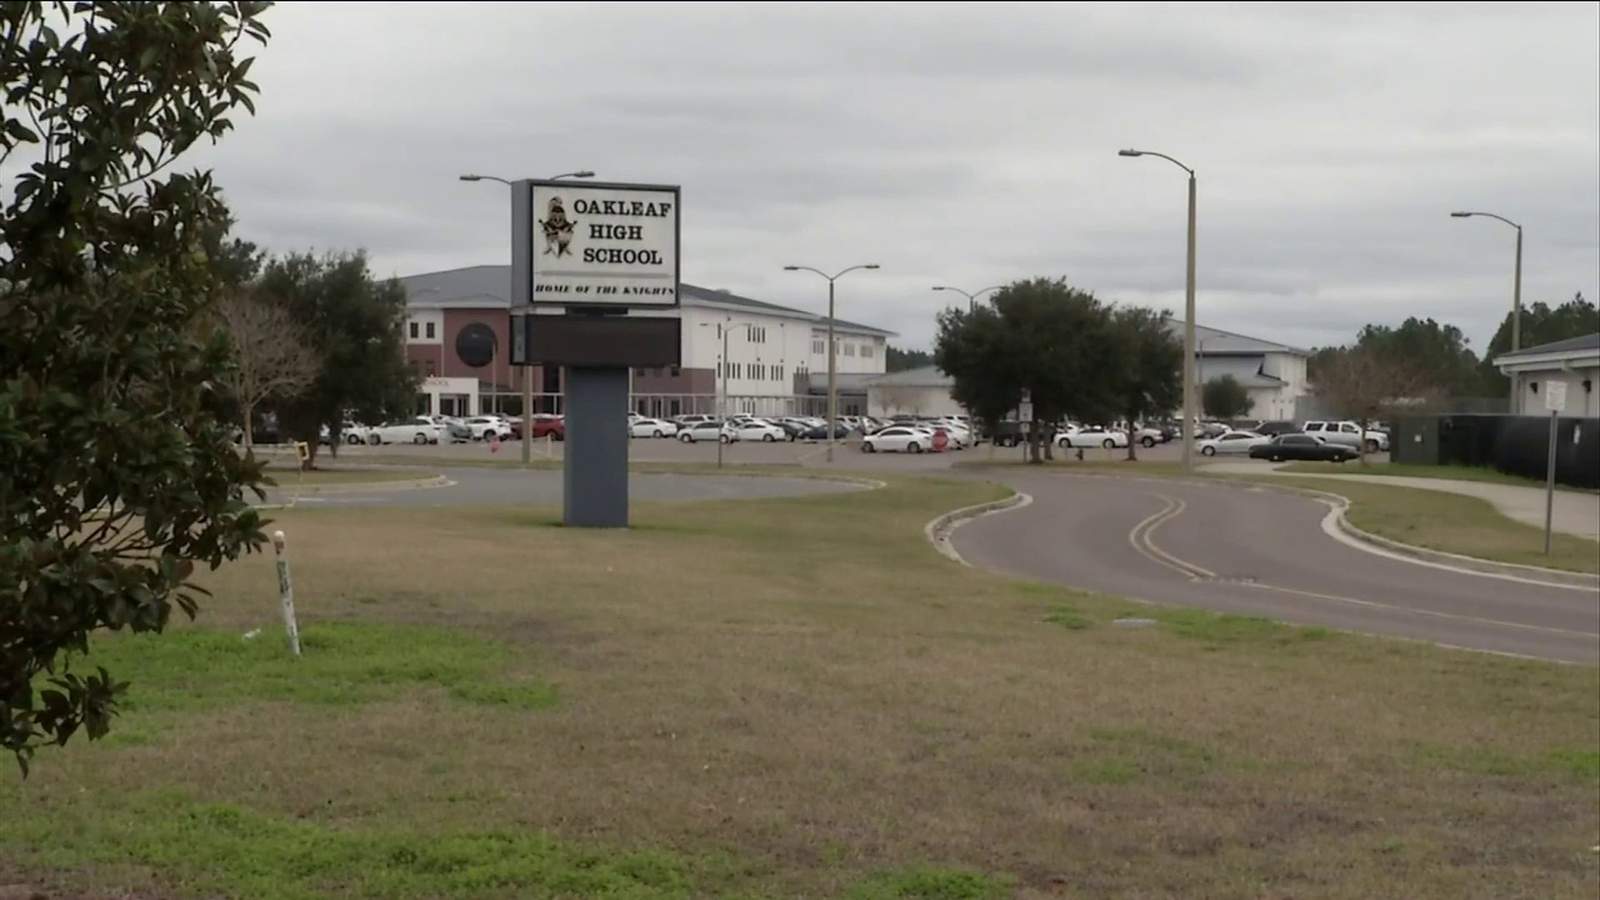 Clay County Schools has plan to alleviate crowding at Oakleaf High